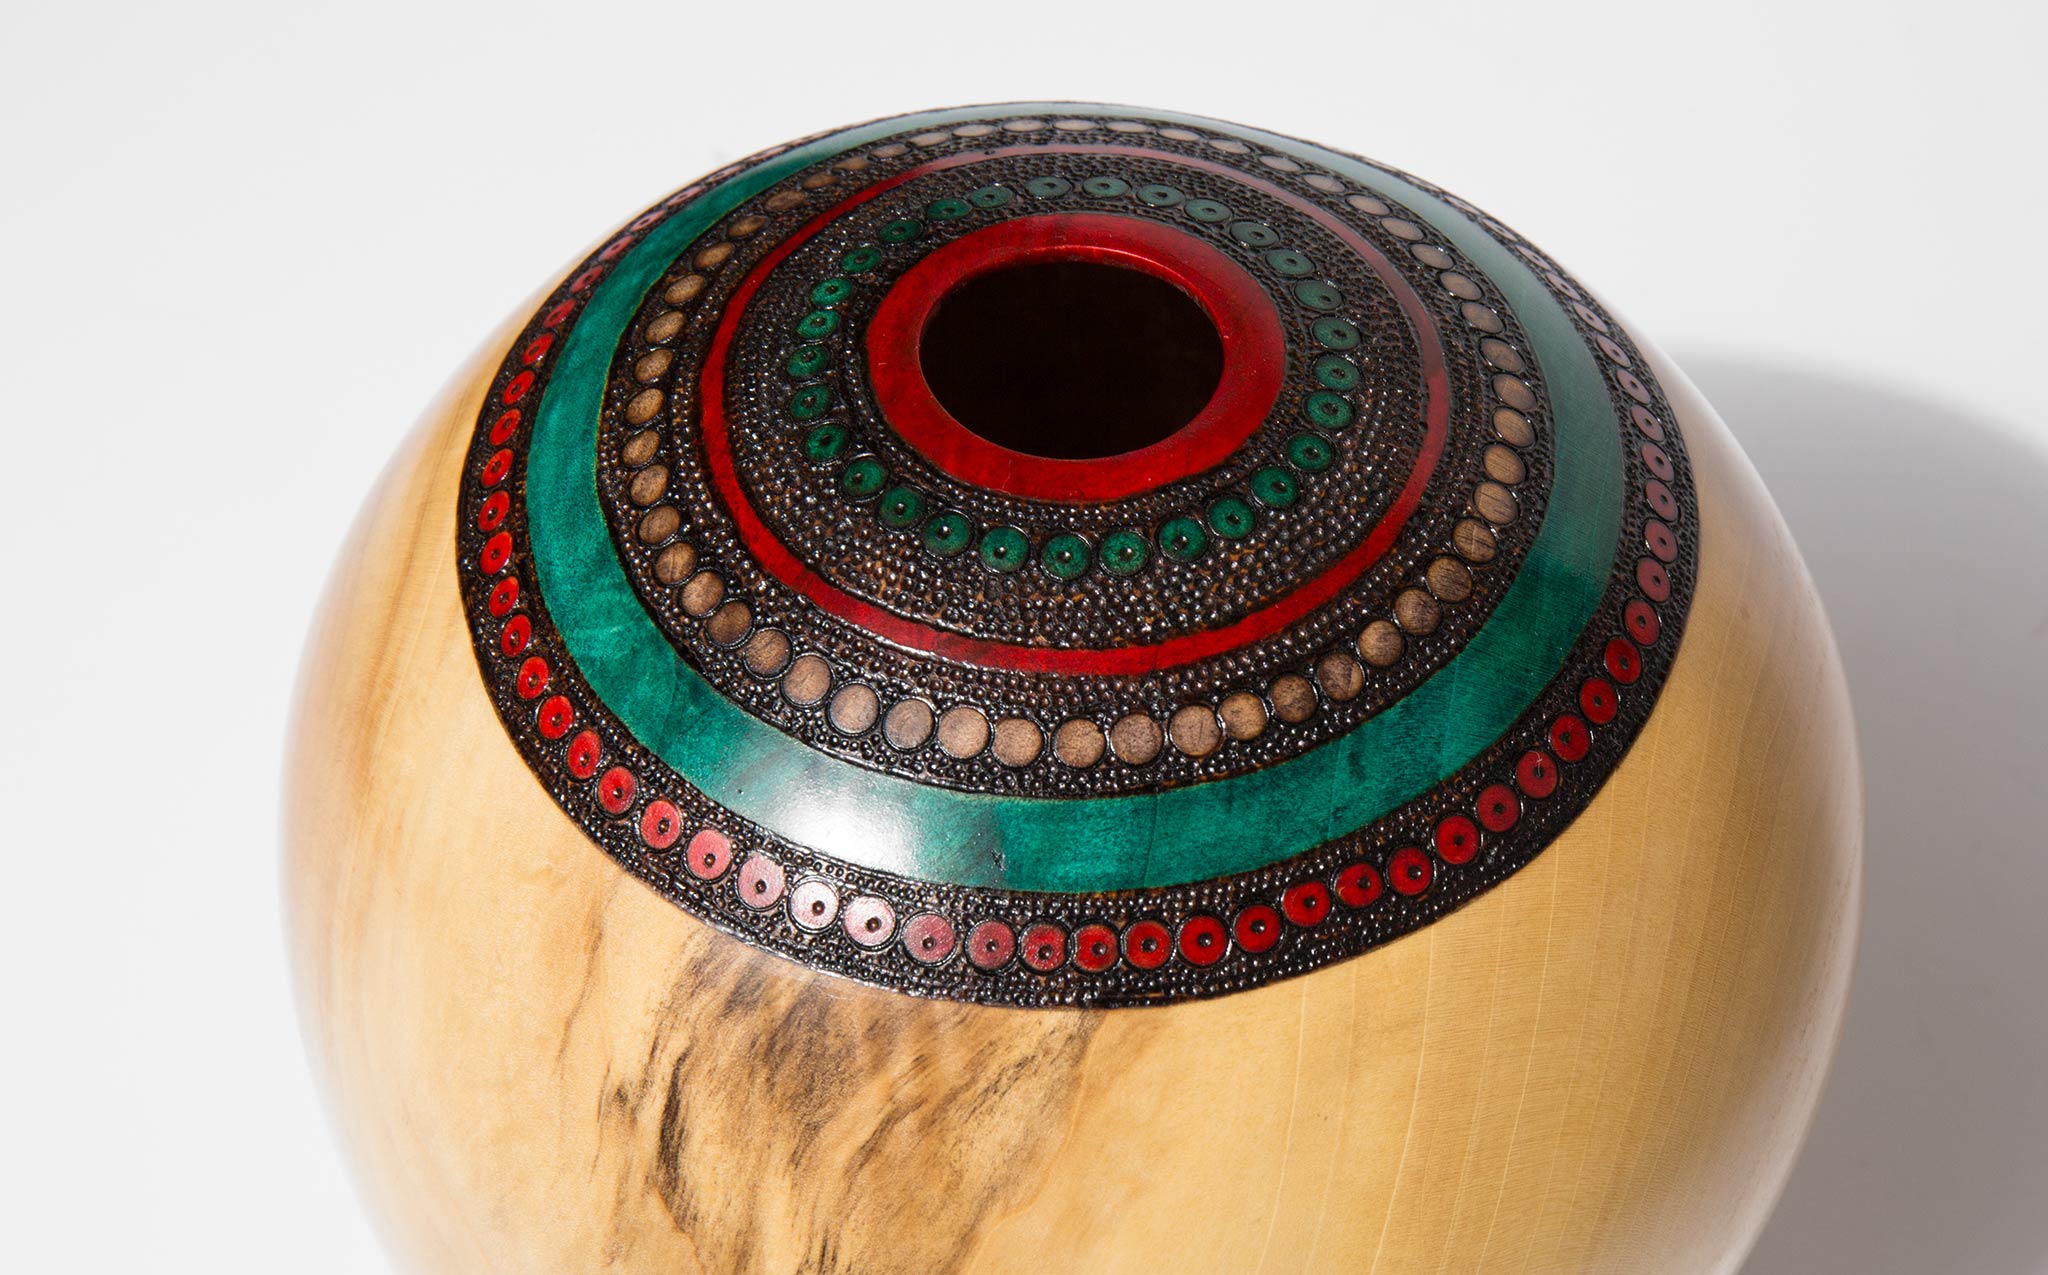 Bruce Perlmutter Hand Lathed Poplar Vessel With Pyrography